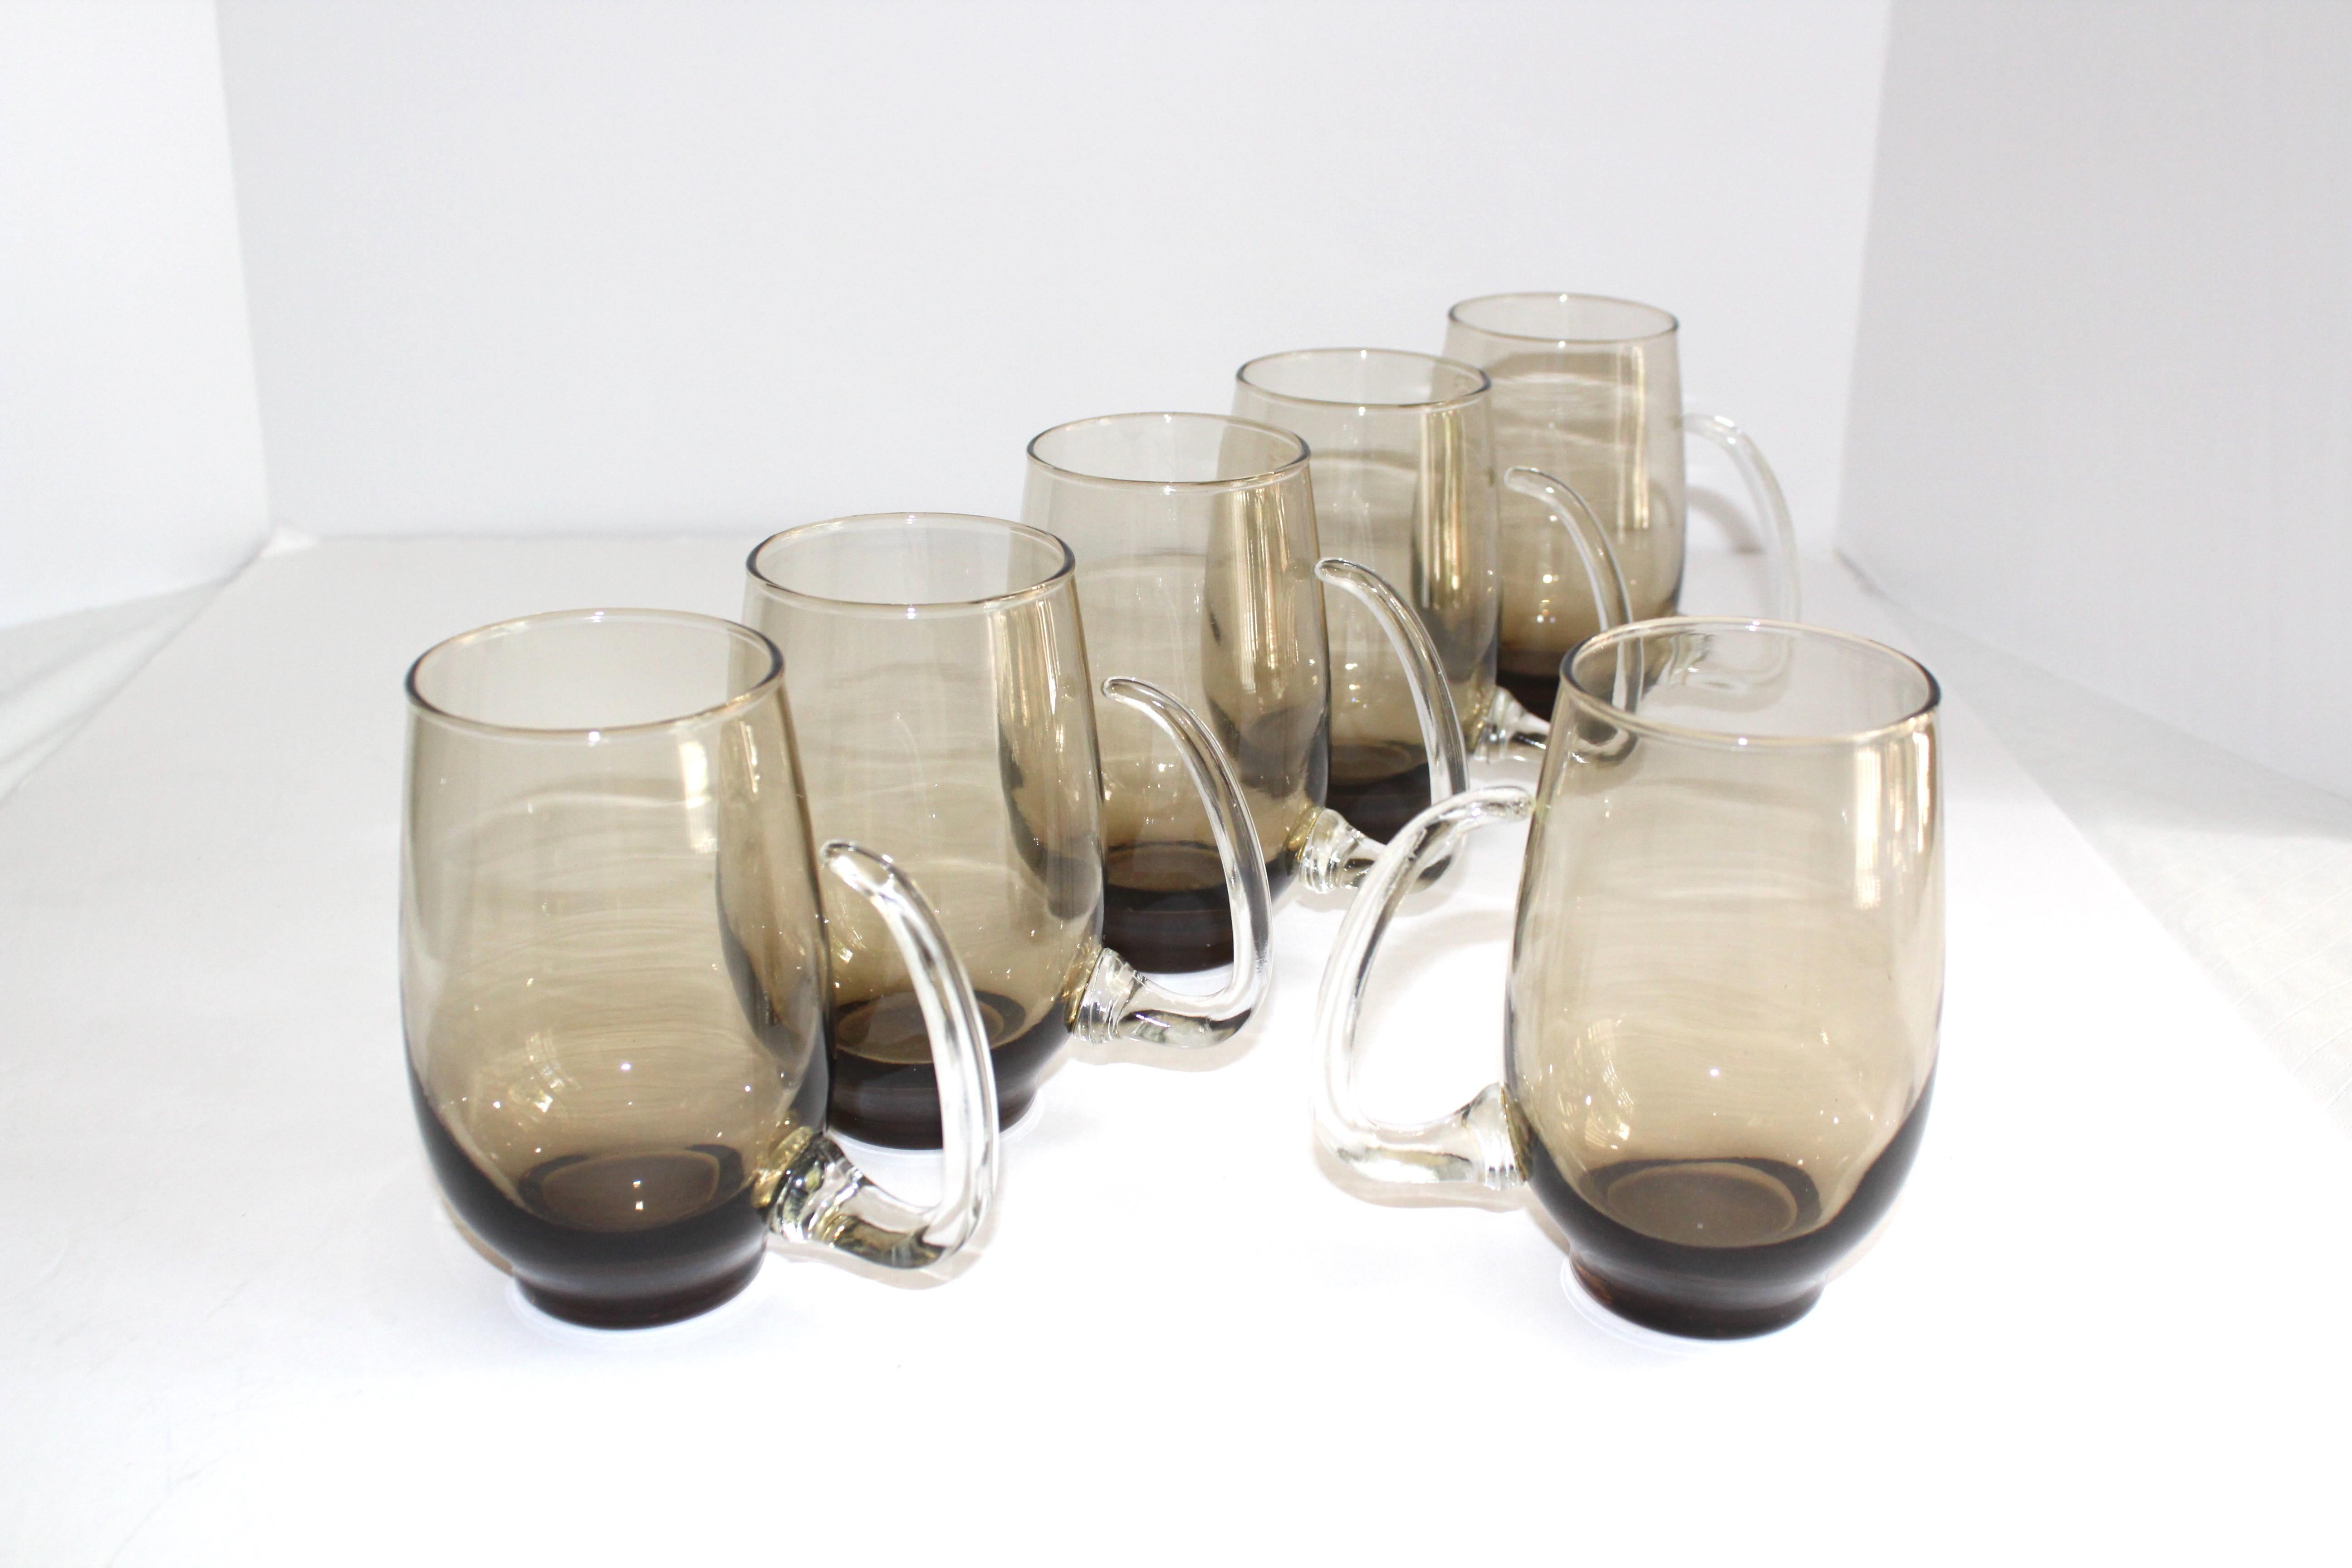 Set of six Mid-Century Modern barware glasses and beer mug. Handblown glass with smokey grey or brown tint. The glasses feature modernist clear glass handles with stylized horn formation.